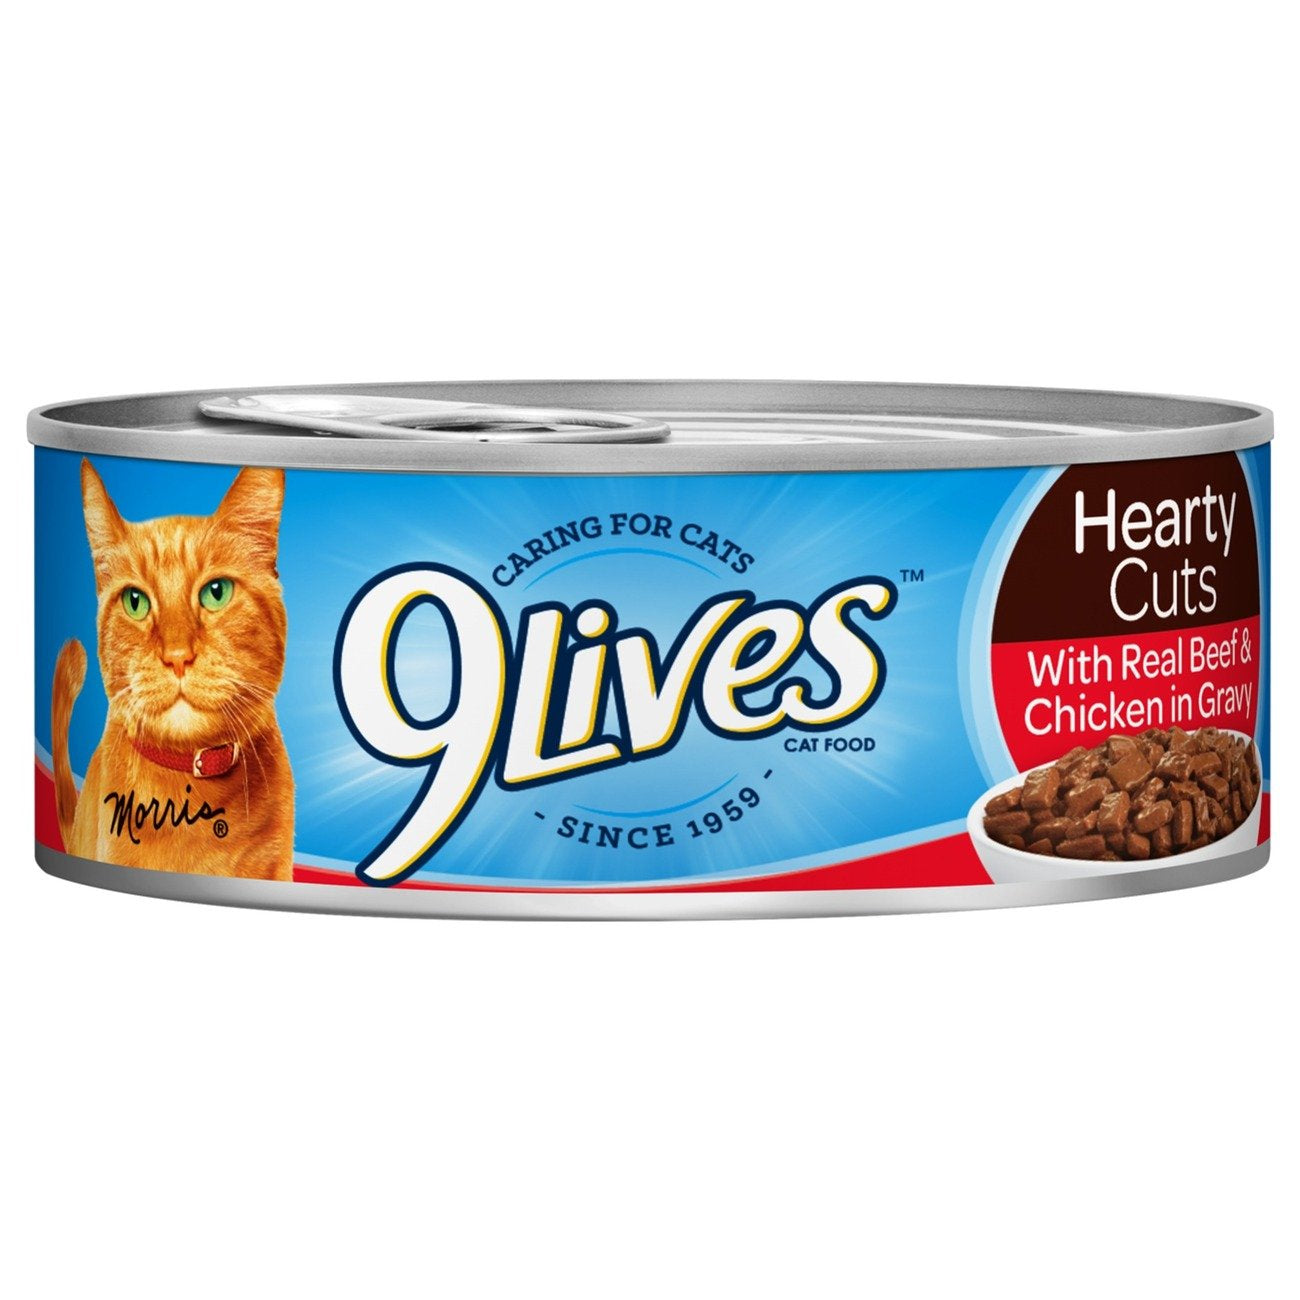 9Lives Cat Food With Real Beef & Chicken in Gravy 5.5oz